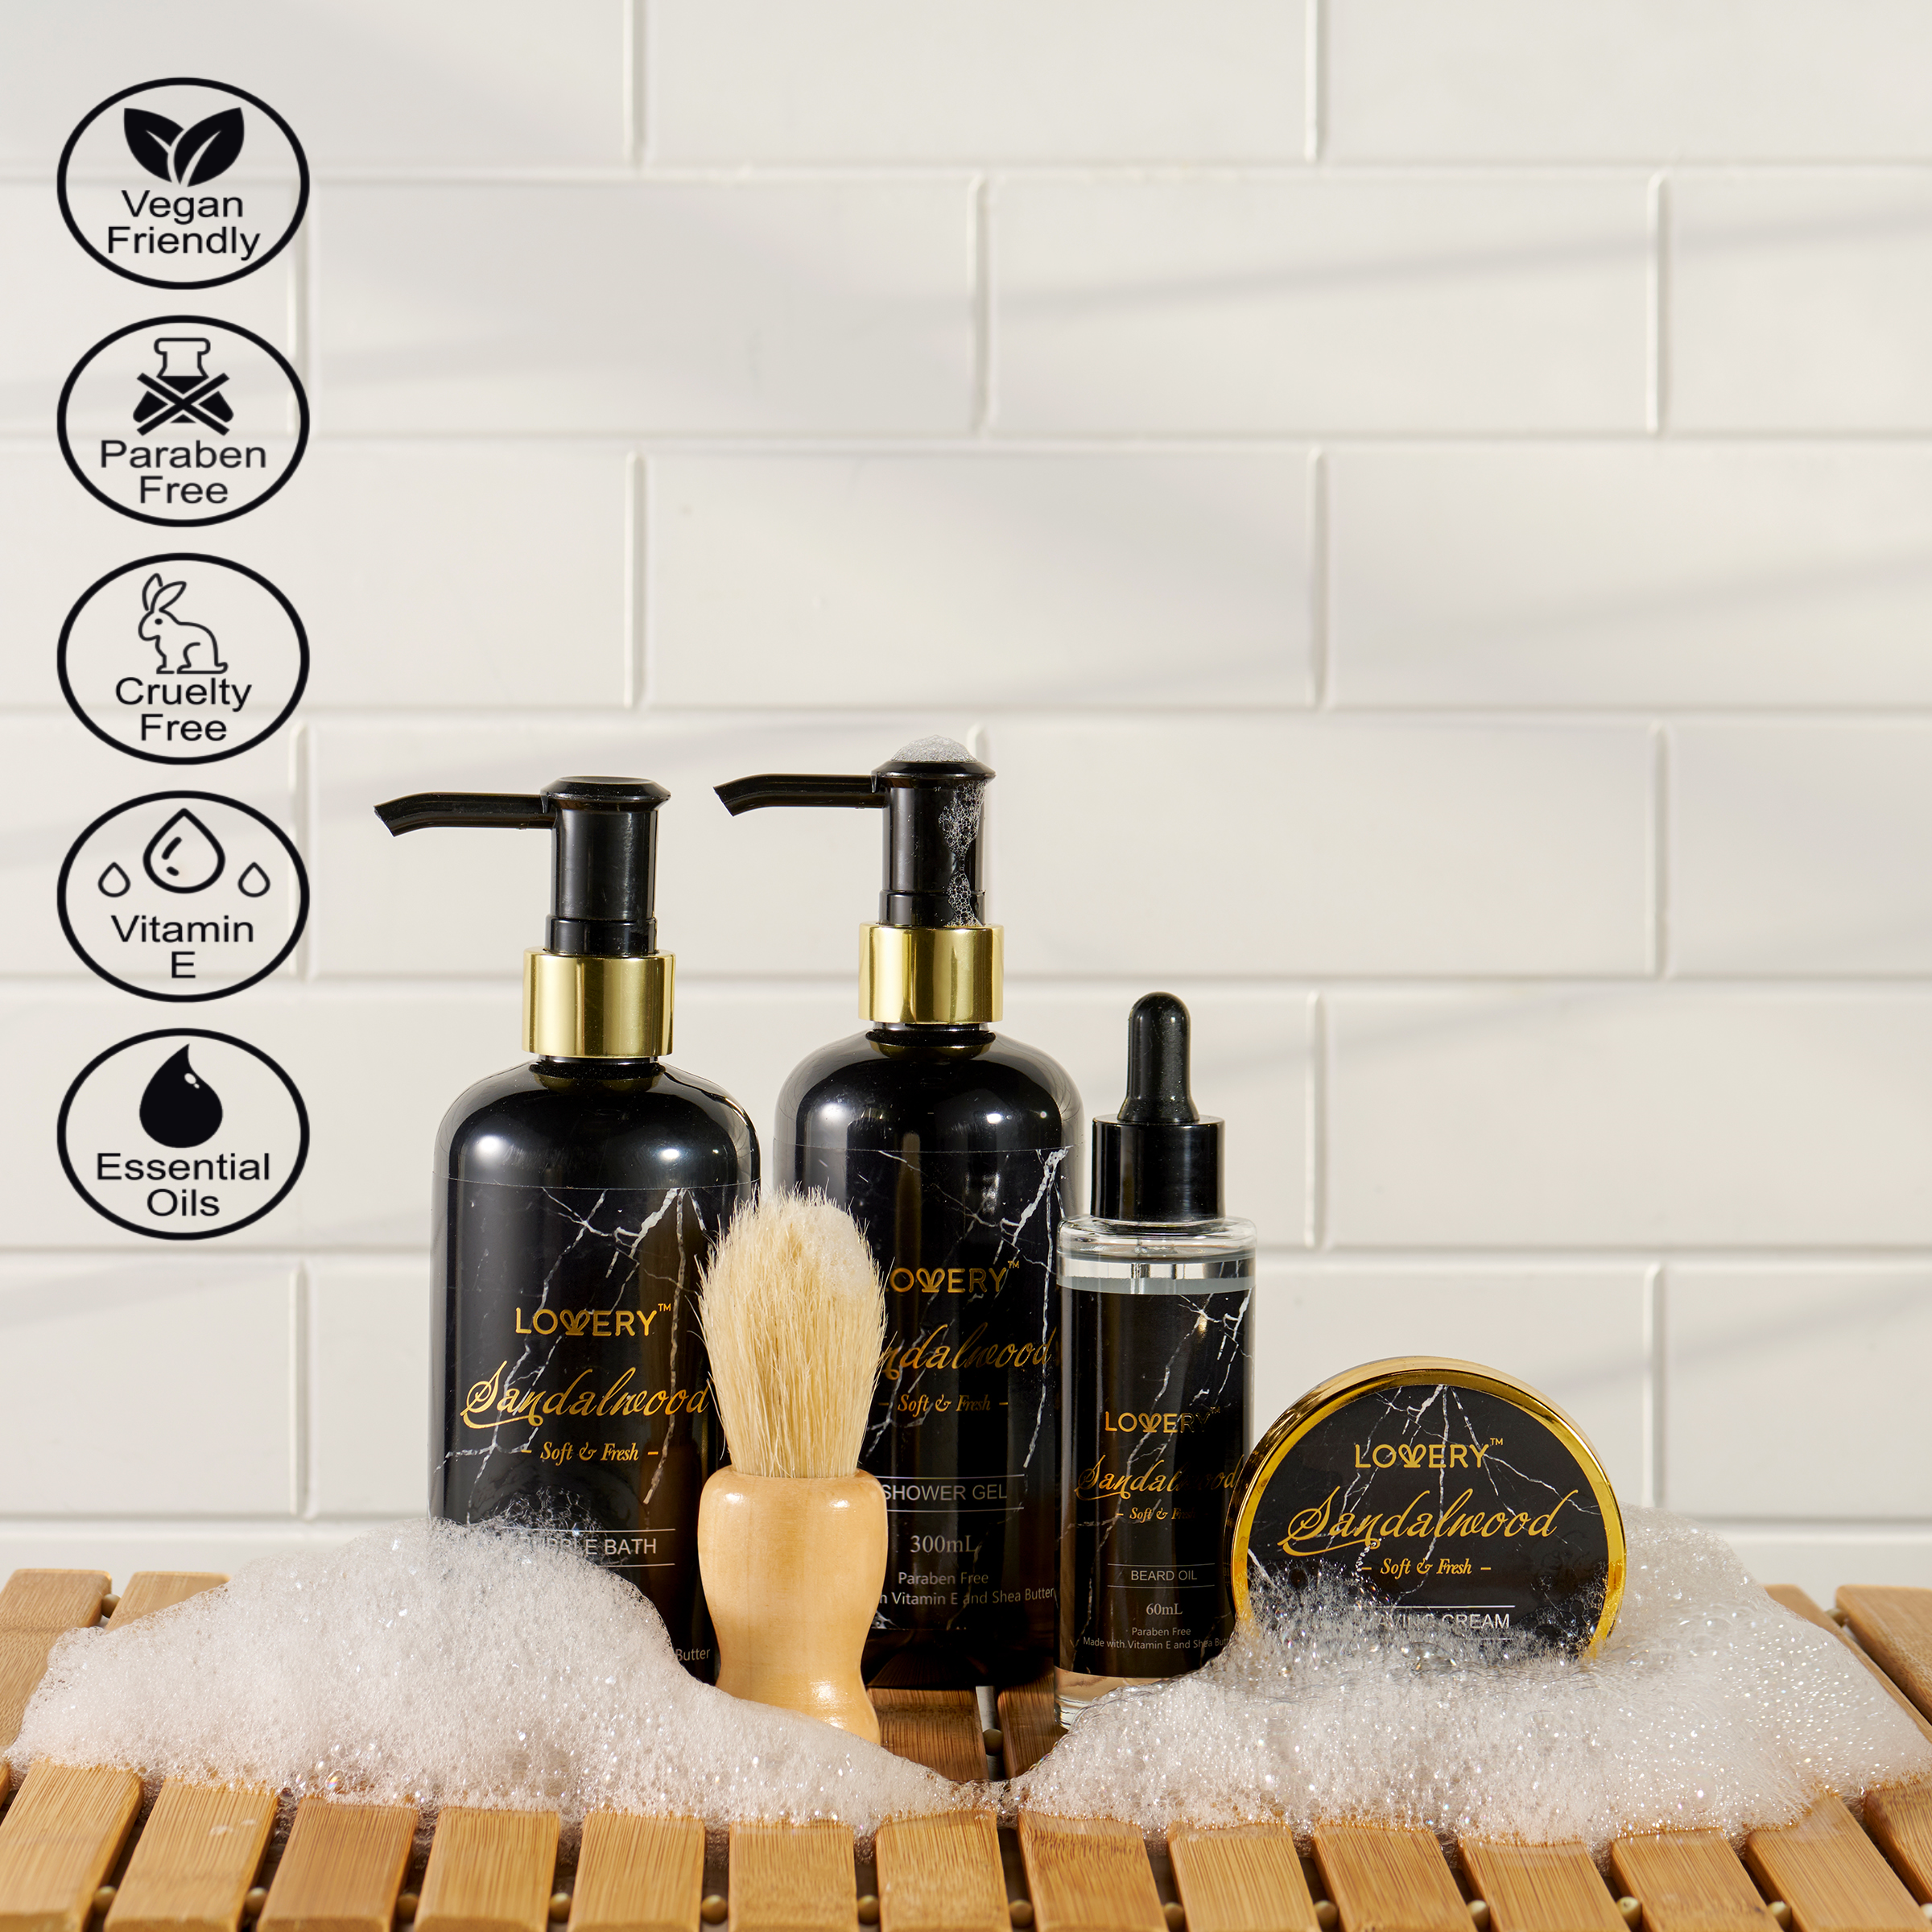 Buy The Menshine 5-In-1 Premium Grooming Kit For Men (1 Items In The Set)  Online - Get 51% Off